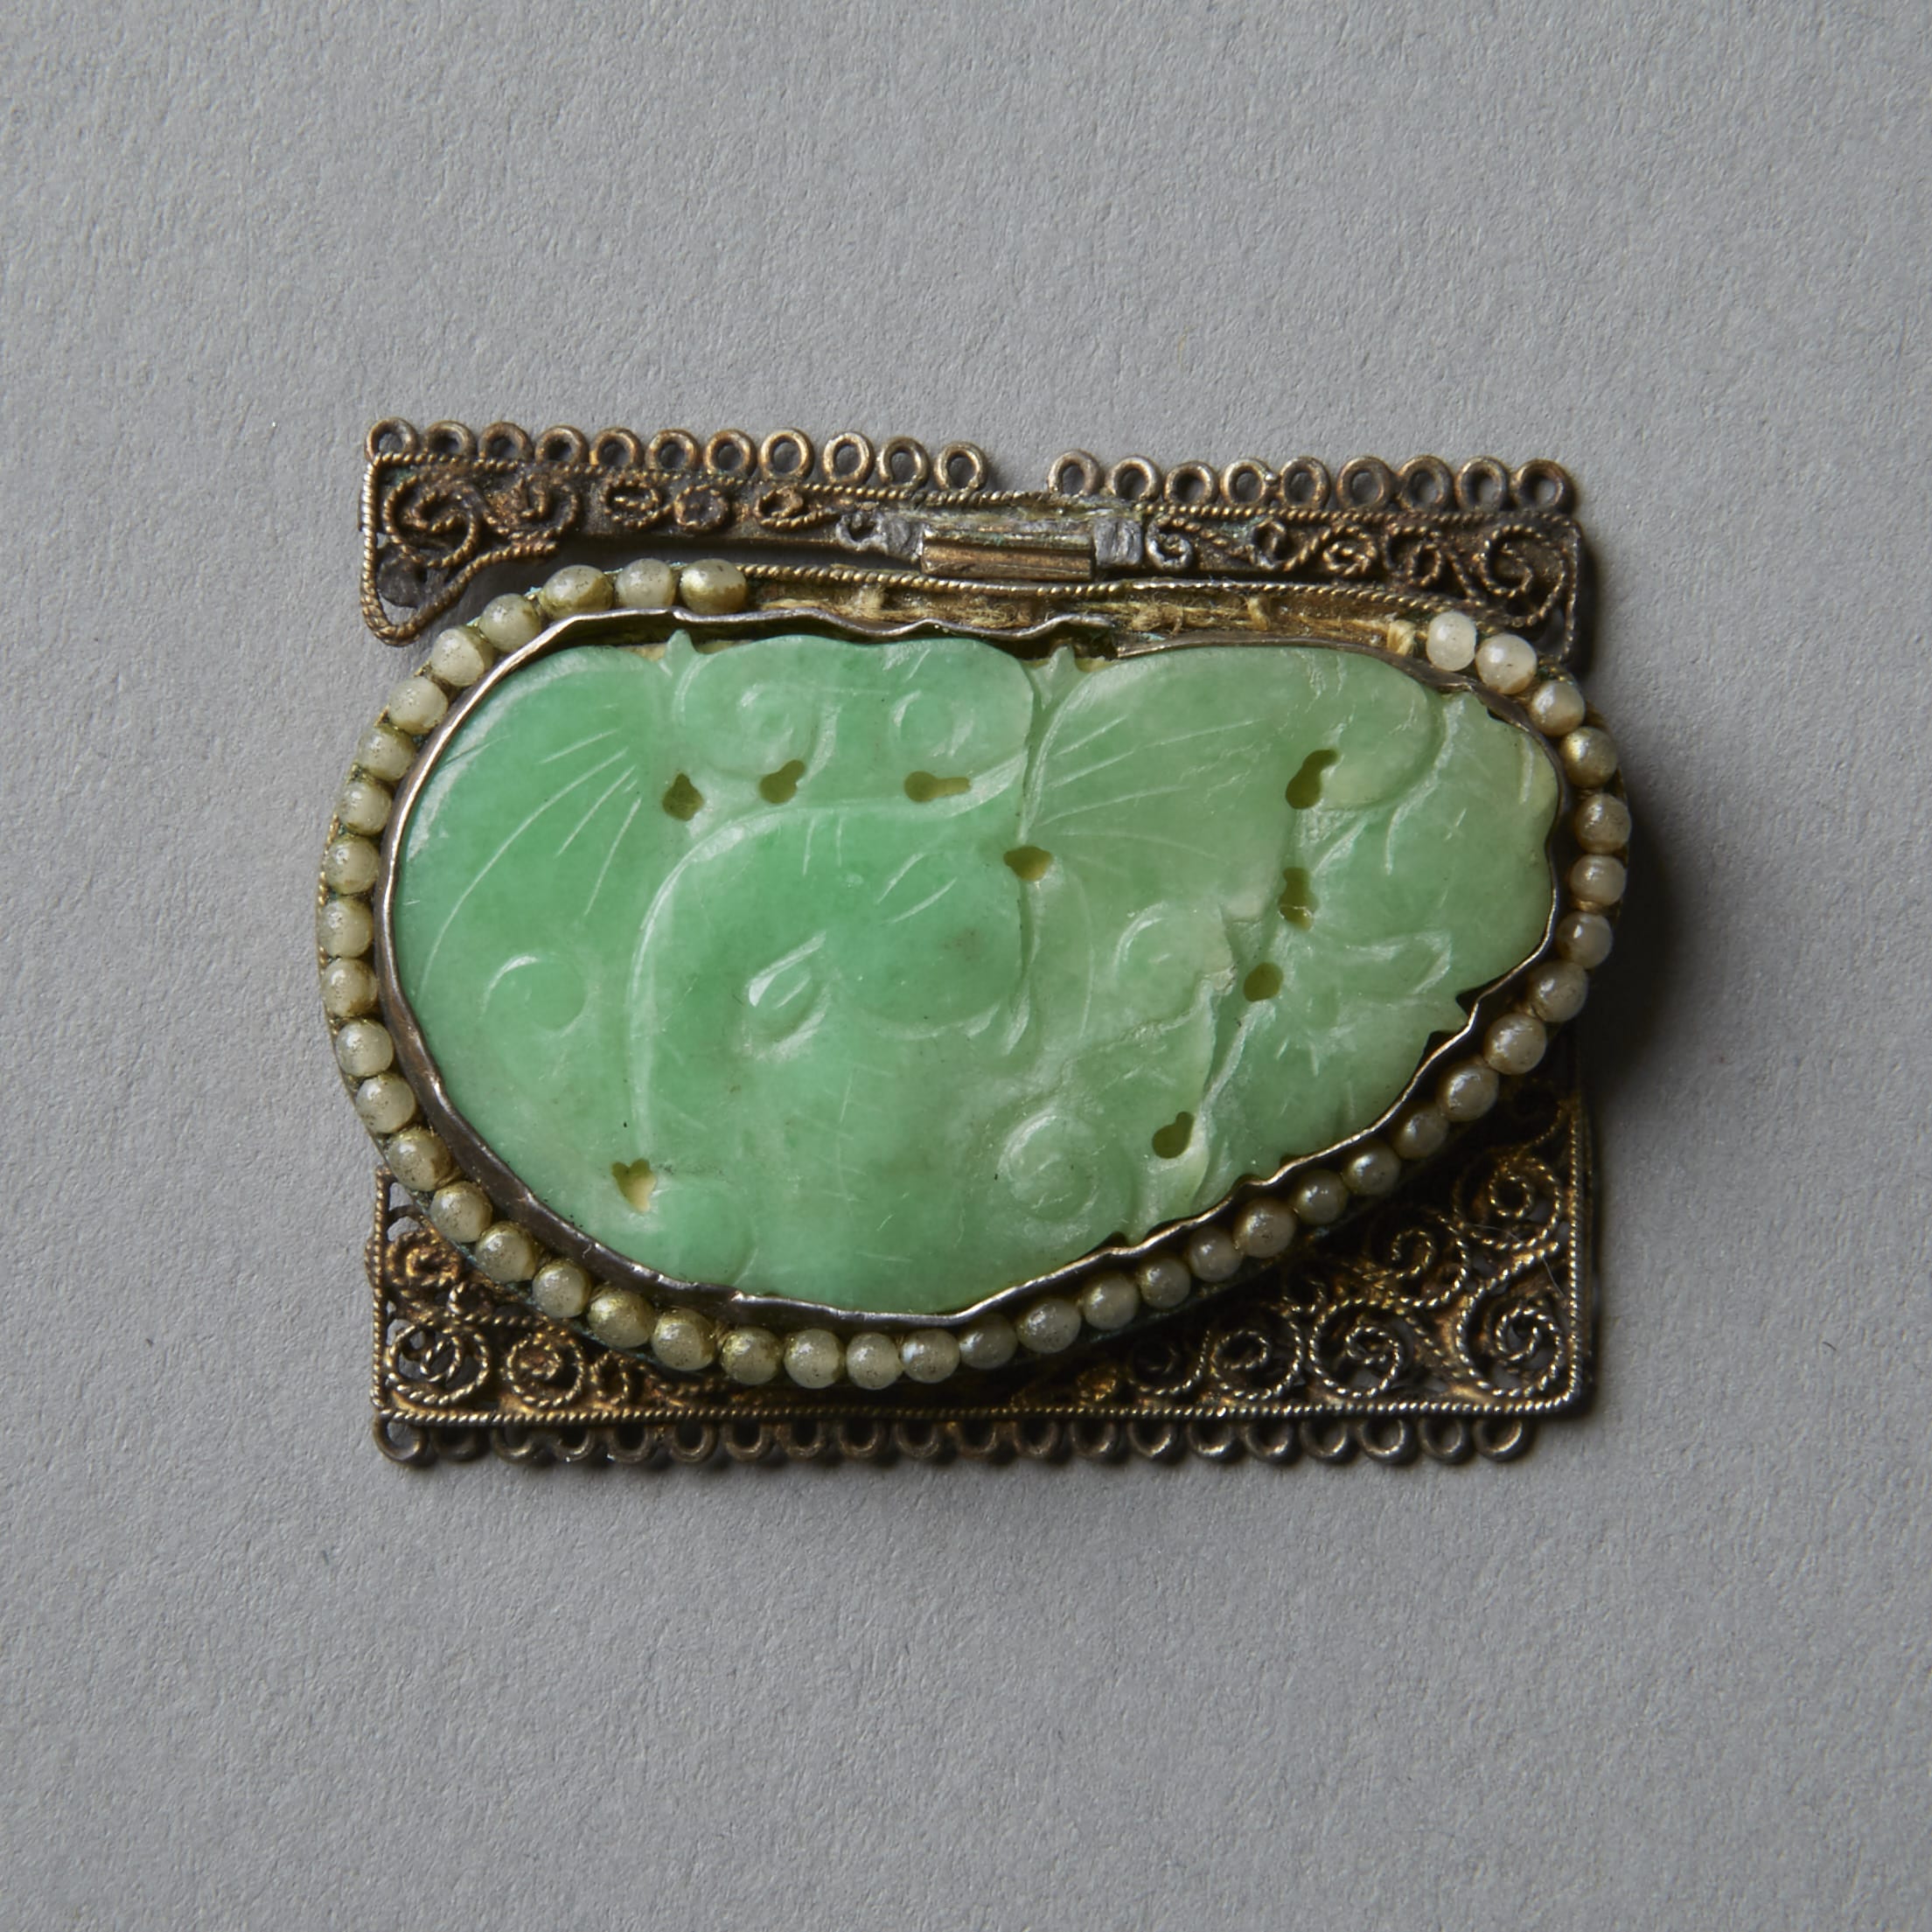 Lot 034: Very Fine Chinese bright green Jade Plaque Mounted in an export Silver Buckle